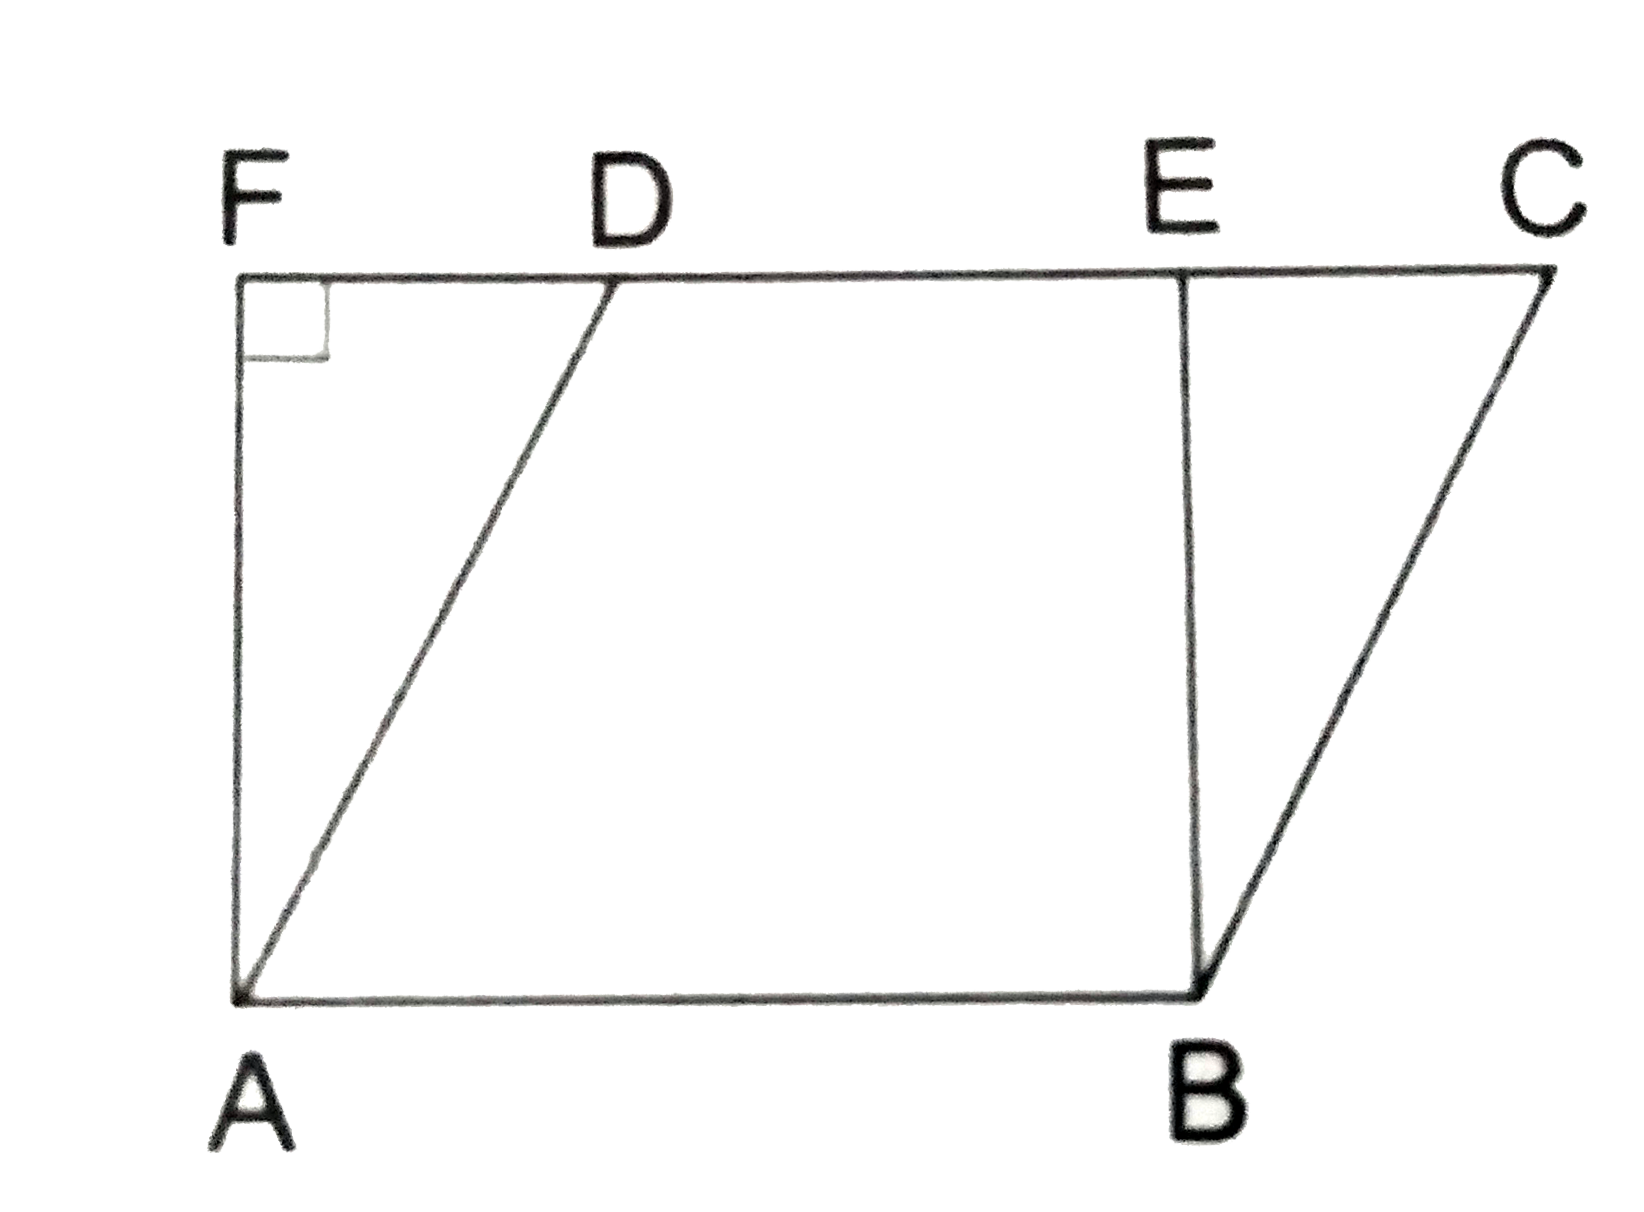 In the given figure, a ||gm  ABCD and a rectangle ABEF are of equal area. Then,